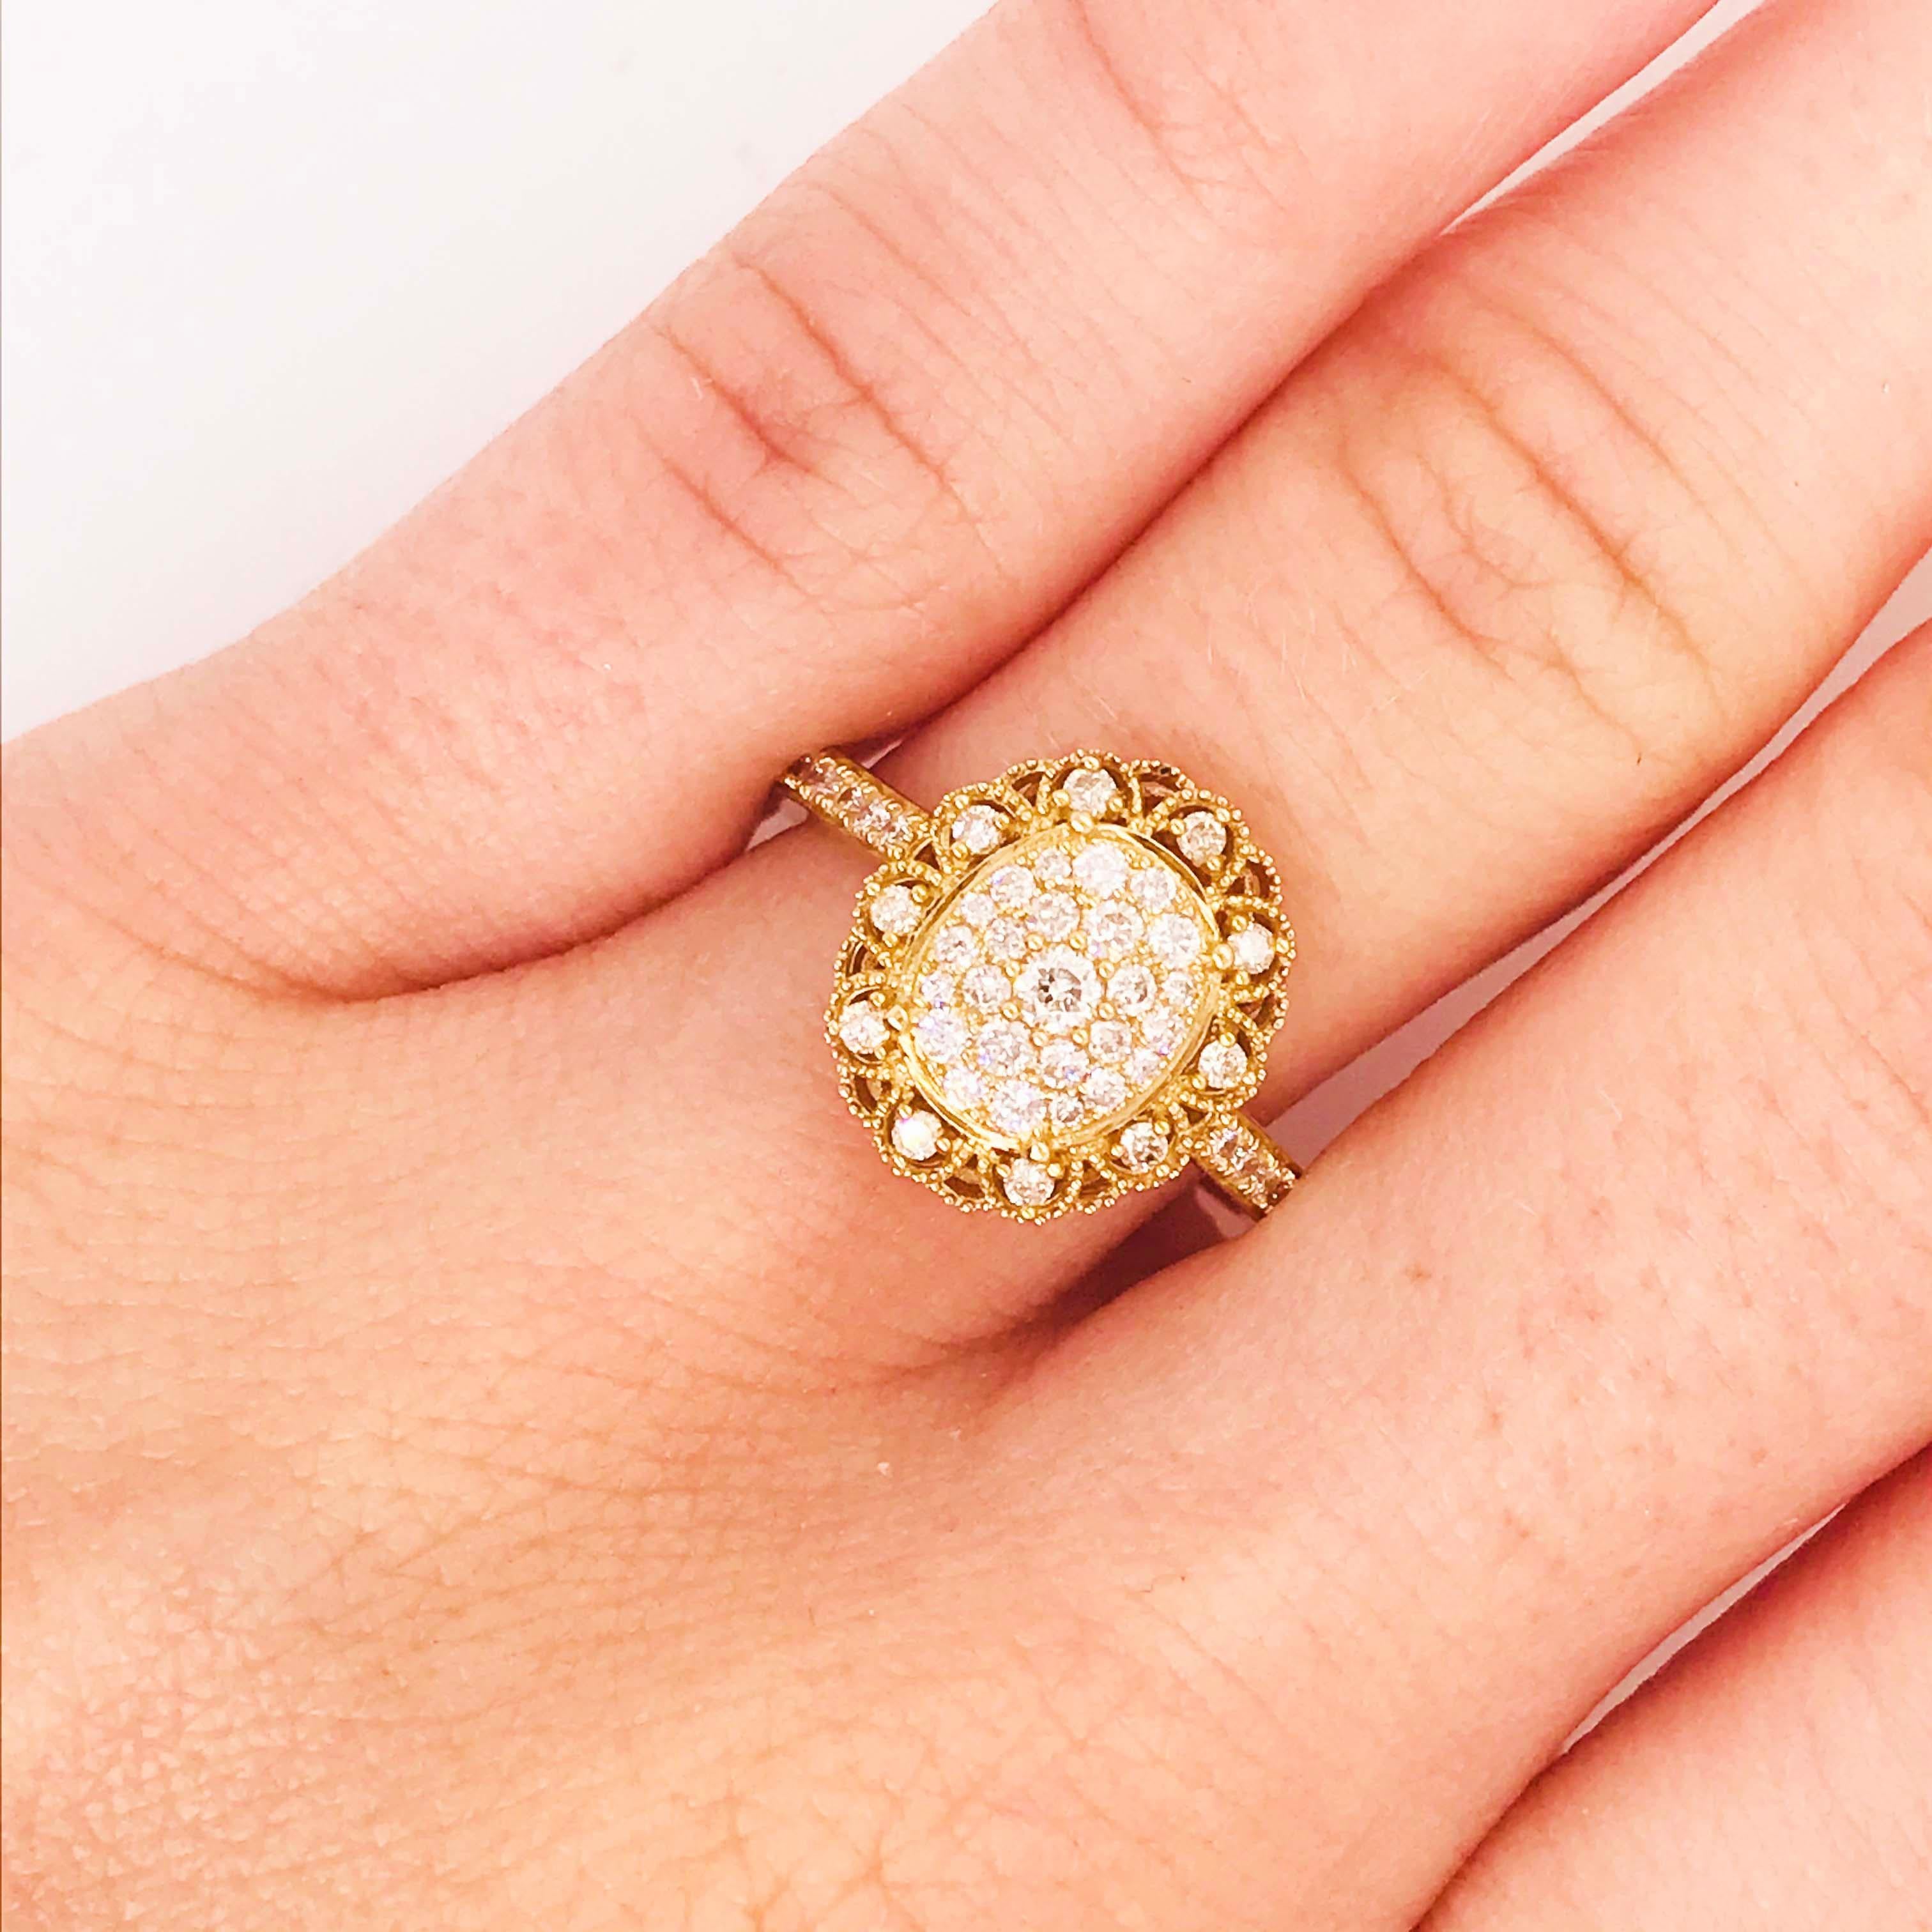 Artisan Antique Inspired Oval Pave 1/2 Carat Diamond Engagement Ring in Yellow Gold